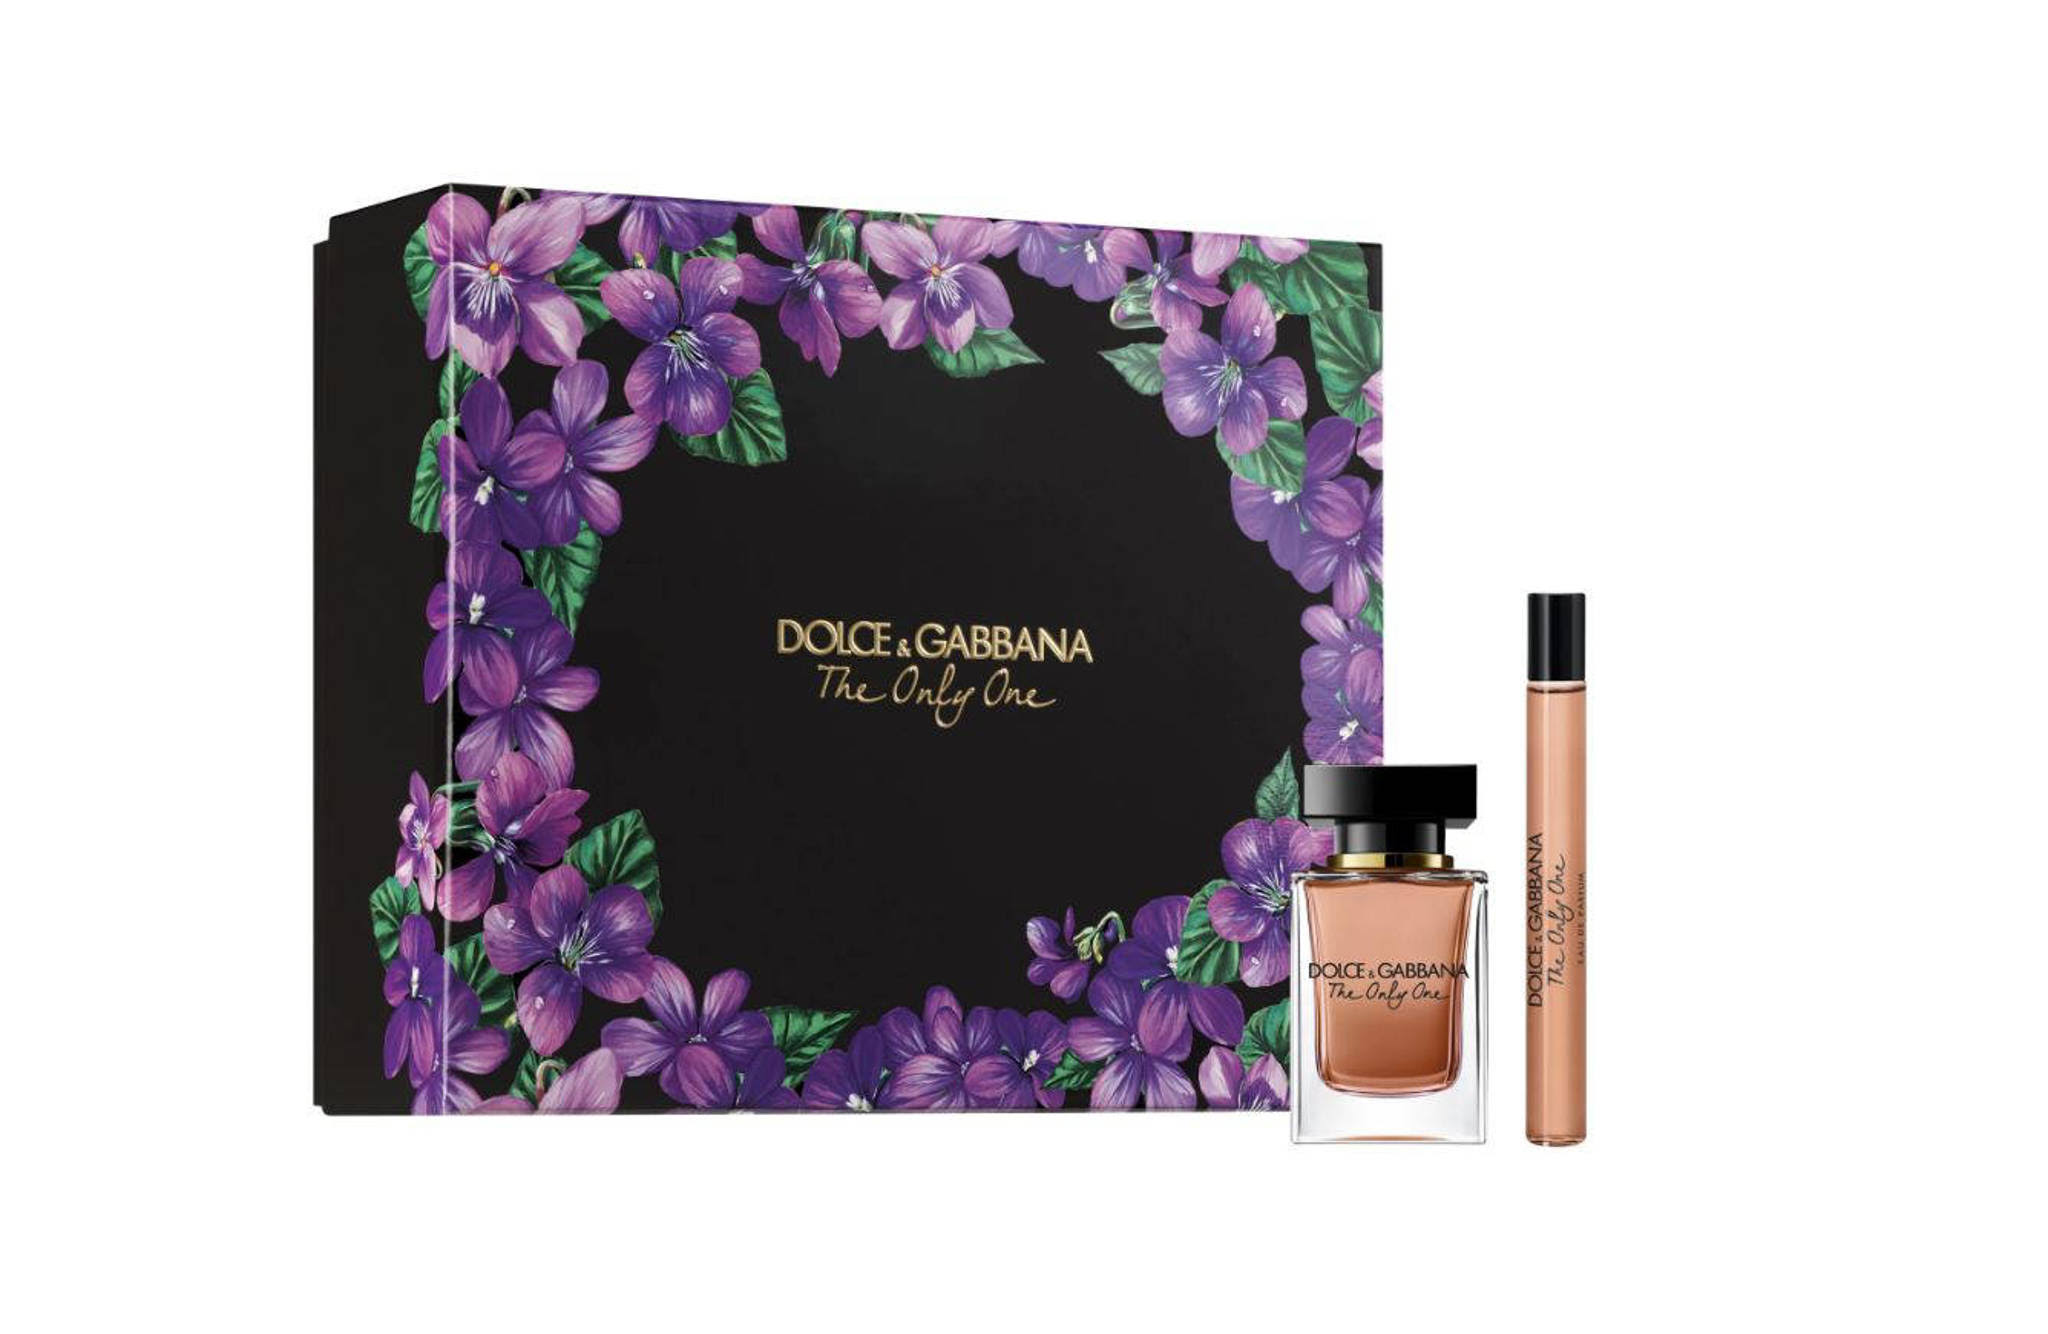 The Only One by Dolce and Gabbana for Women - 2 PC Gift Set